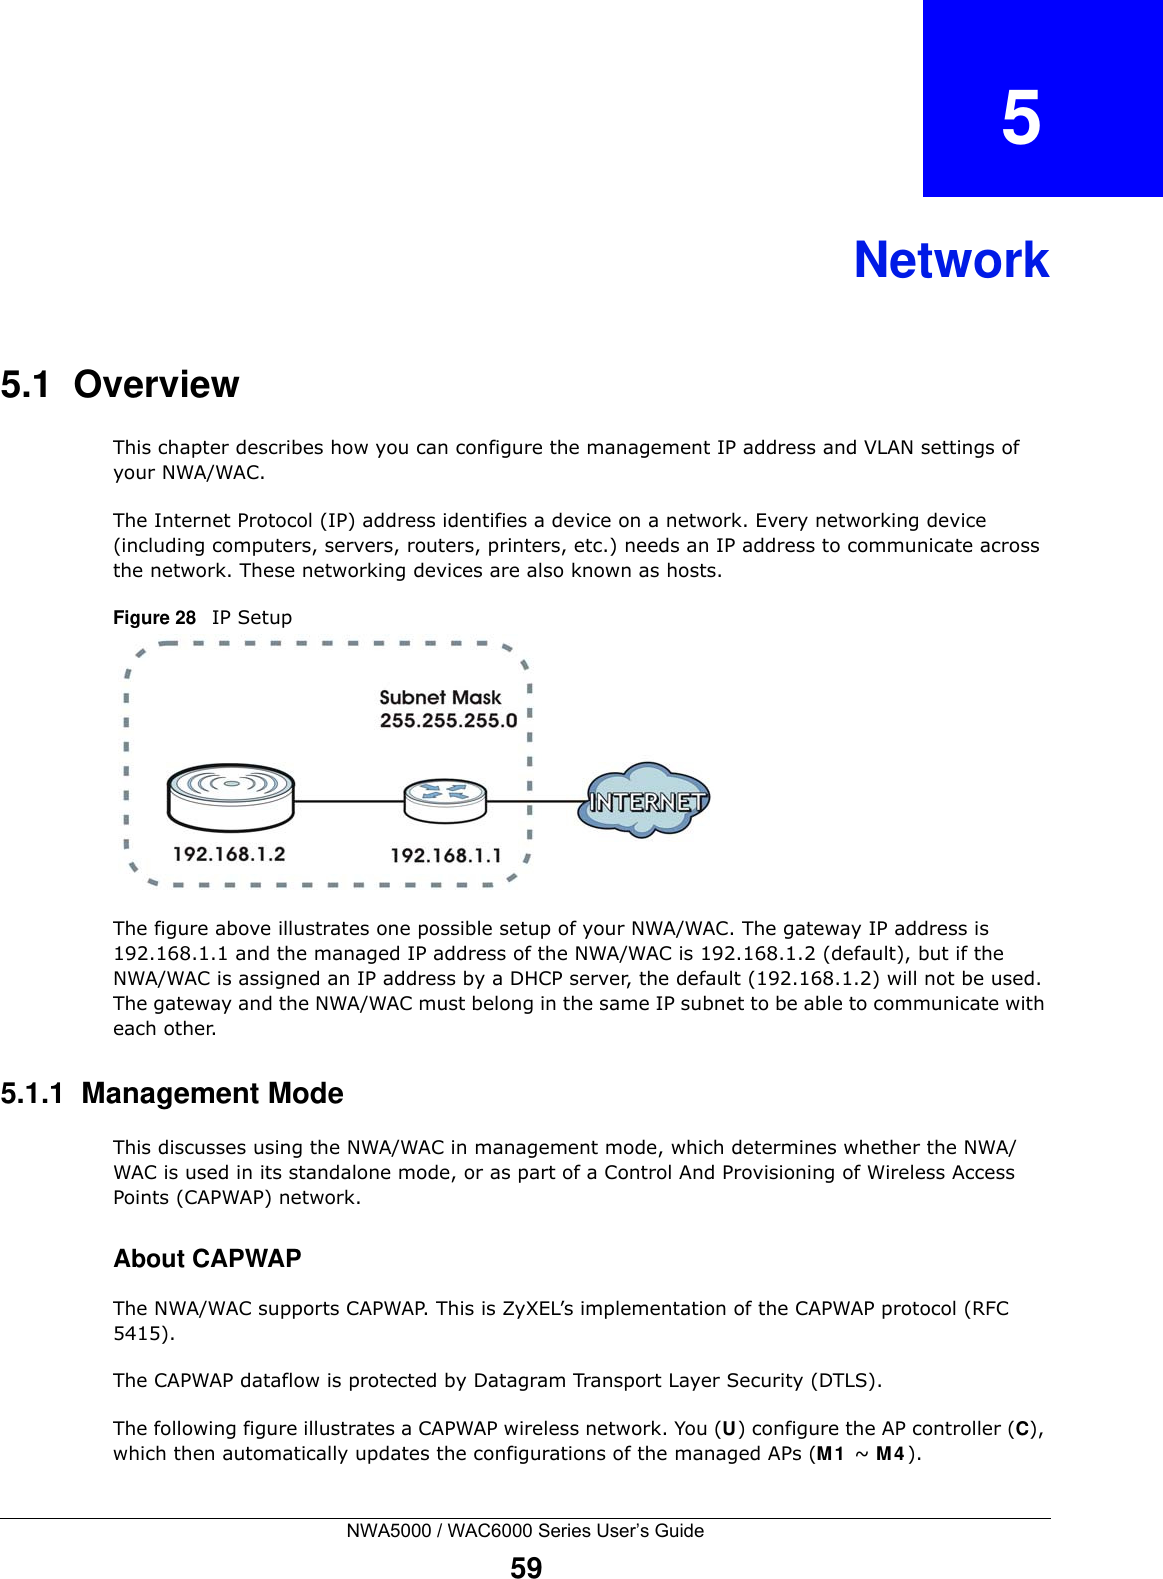 NWA5000 / WAC6000 Series User’s Guide59CHAPTER   5Network5.1  OverviewThis chapter describes how you can configure the management IP address and VLAN settings of your NWA/WAC.The Internet Protocol (IP) address identifies a device on a network. Every networking device (including computers, servers, routers, printers, etc.) needs an IP address to communicate across the network. These networking devices are also known as hosts.Figure 28   IP SetupThe figure above illustrates one possible setup of your NWA/WAC. The gateway IP address is 192.168.1.1 and the managed IP address of the NWA/WAC is 192.168.1.2 (default), but if the NWA/WAC is assigned an IP address by a DHCP server, the default (192.168.1.2) will not be used. The gateway and the NWA/WAC must belong in the same IP subnet to be able to communicate with each other.5.1.1  Management ModeThis discusses using the NWA/WAC in management mode, which determines whether the NWA/WAC is used in its standalone mode, or as part of a Control And Provisioning of Wireless Access Points (CAPWAP) network. About CAPWAPThe NWA/WAC supports CAPWAP. This is ZyXEL’s implementation of the CAPWAP protocol (RFC 5415). The CAPWAP dataflow is protected by Datagram Transport Layer Security (DTLS).The following figure illustrates a CAPWAP wireless network. You (U) configure the AP controller (C), which then automatically updates the configurations of the managed APs (M1 ~ M4). 